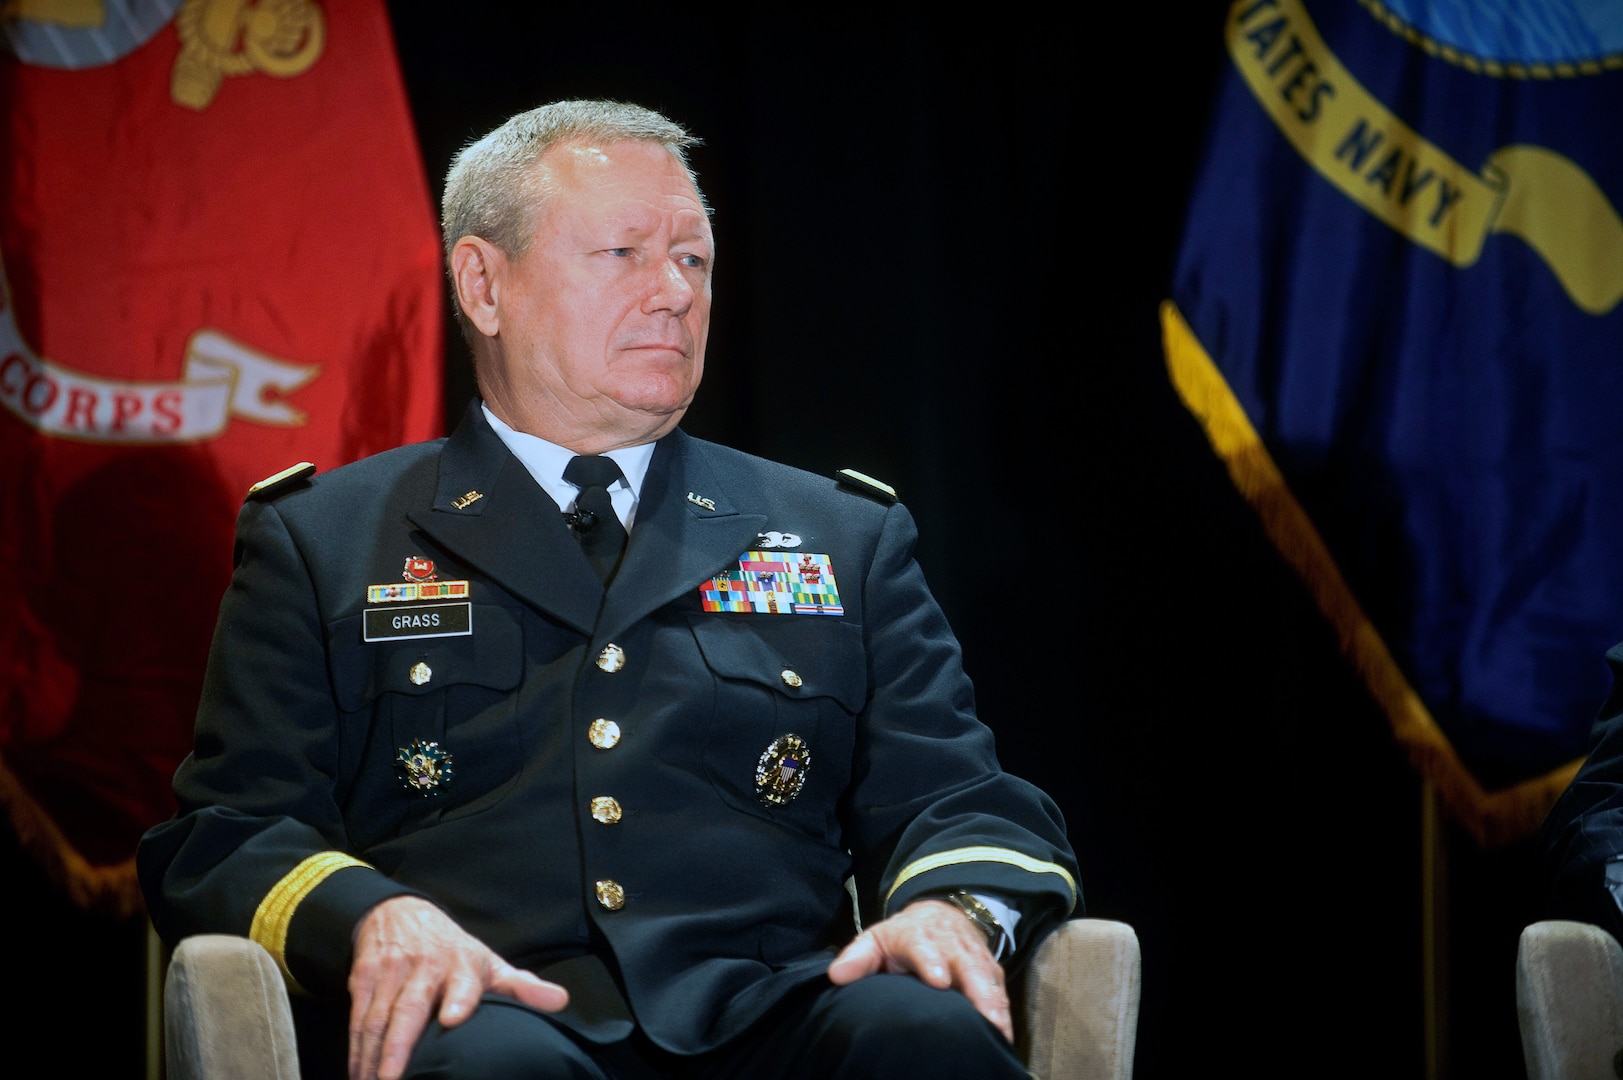 Army Gen. Frank Grass, chief of the National Guard Bureau and a member of the Joint Chiefs of Staff, participates in the Reserve chiefs panel at the Reserve Officers Association National Security Symposium, Washington, D.C., Aug. 9, 2013.